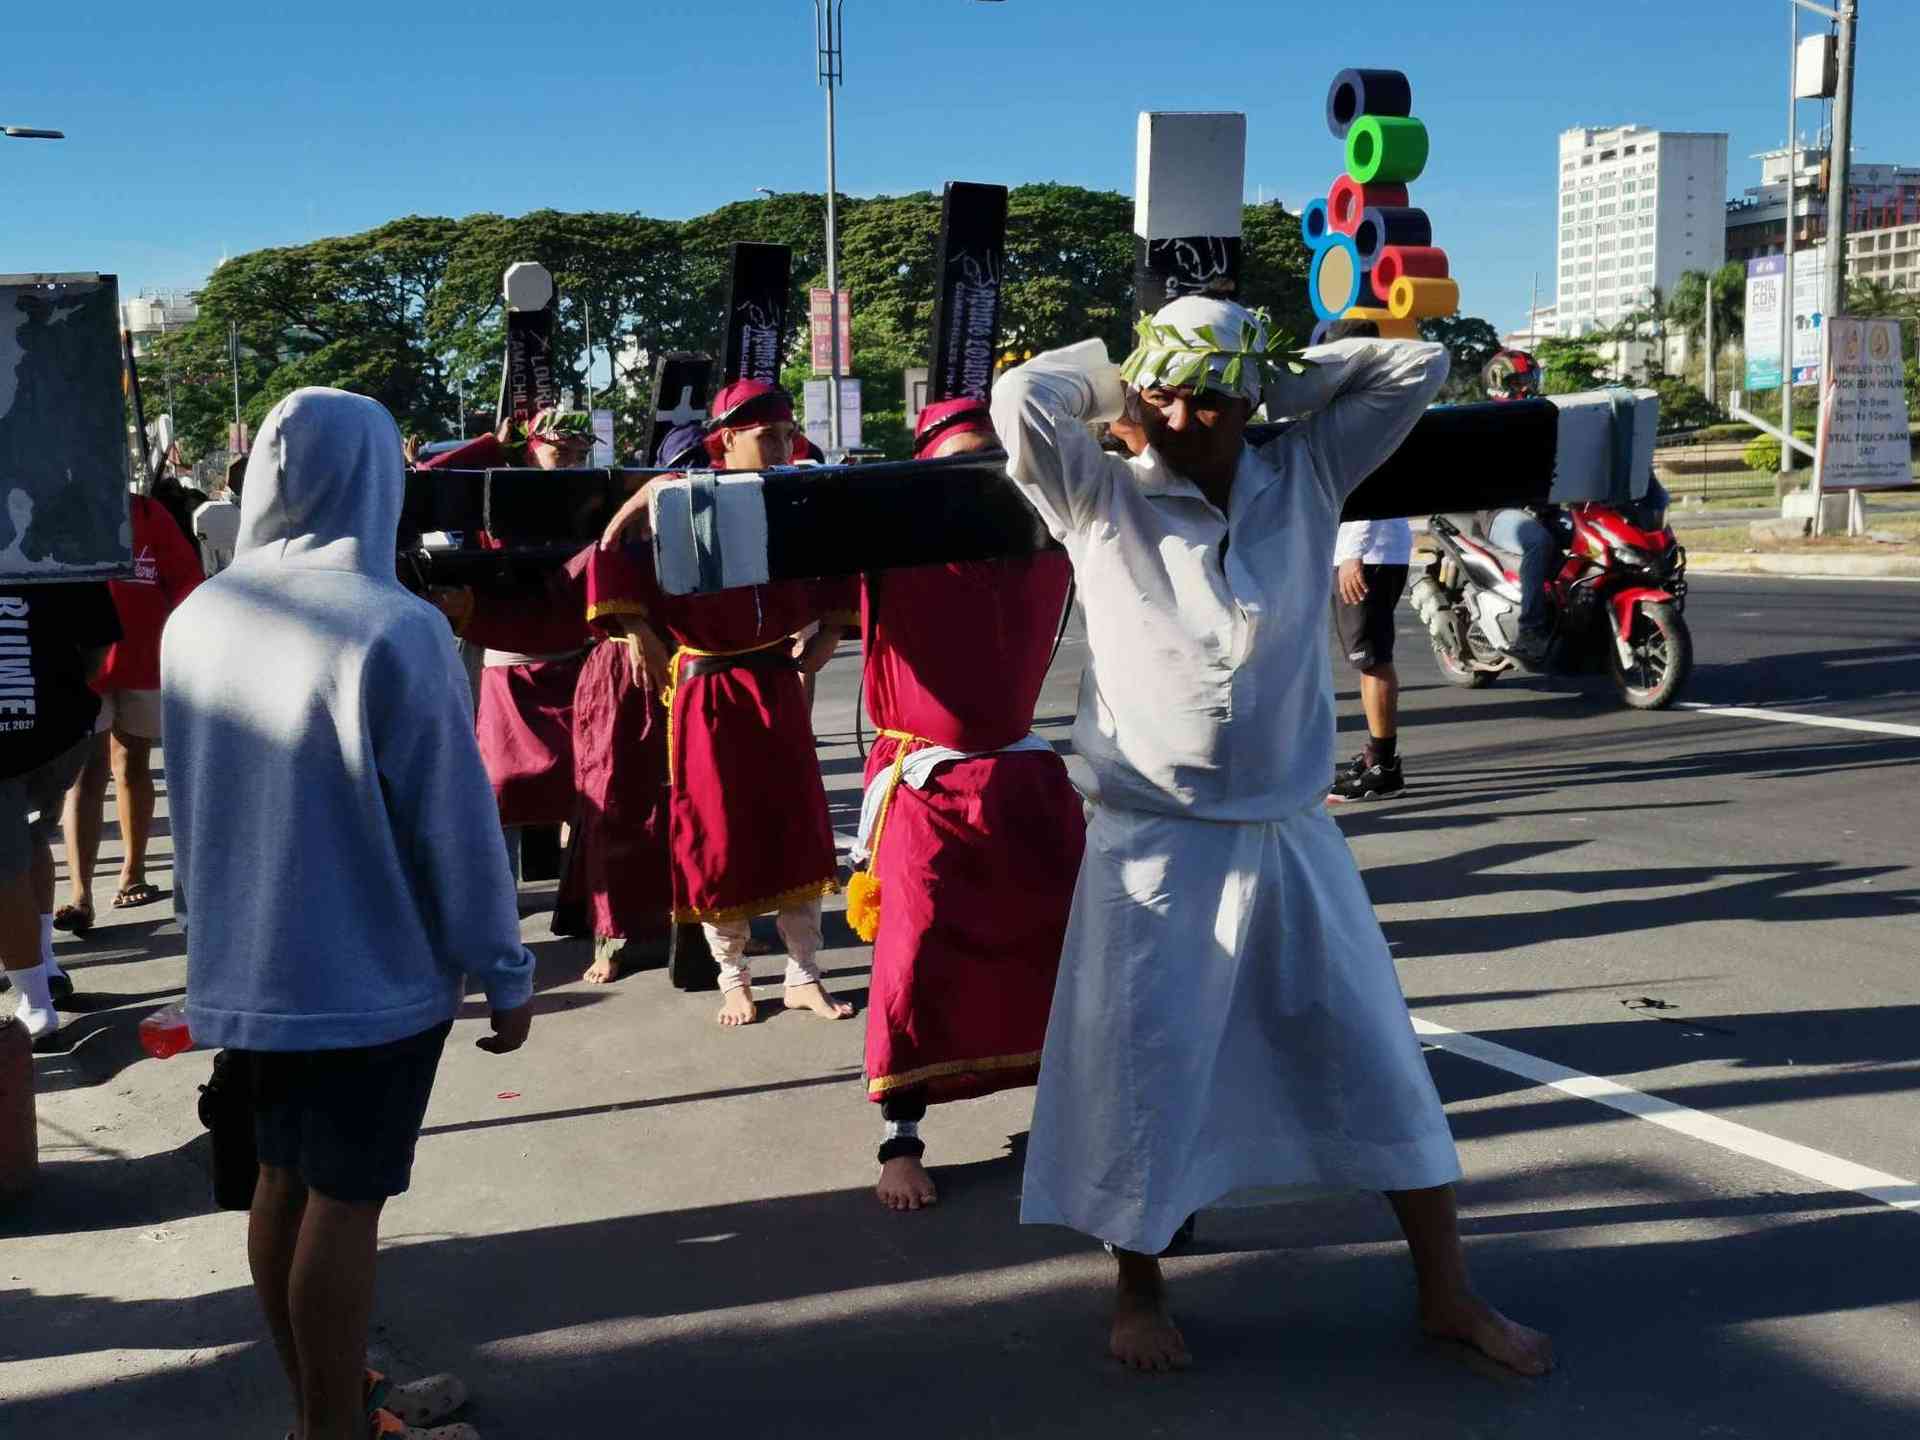 Devotees who performed penitence urged to get check-ups